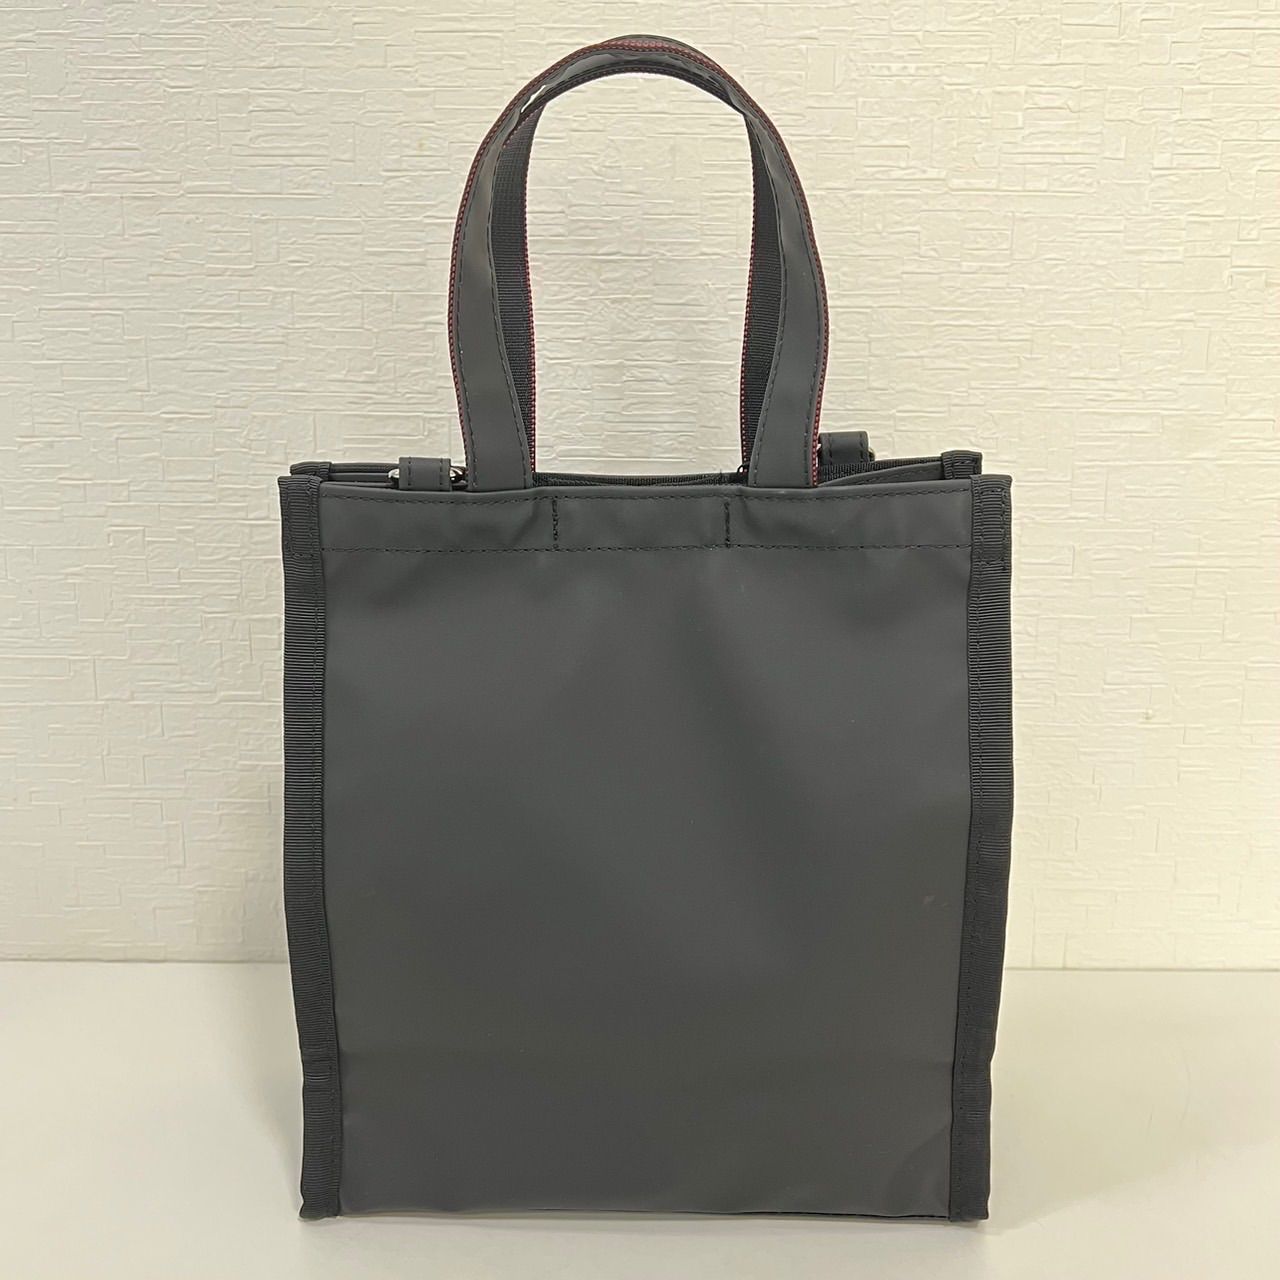 BRIEFING ブリーフィング SQUARE ２WAY TOTE S ブラック トート バッグ